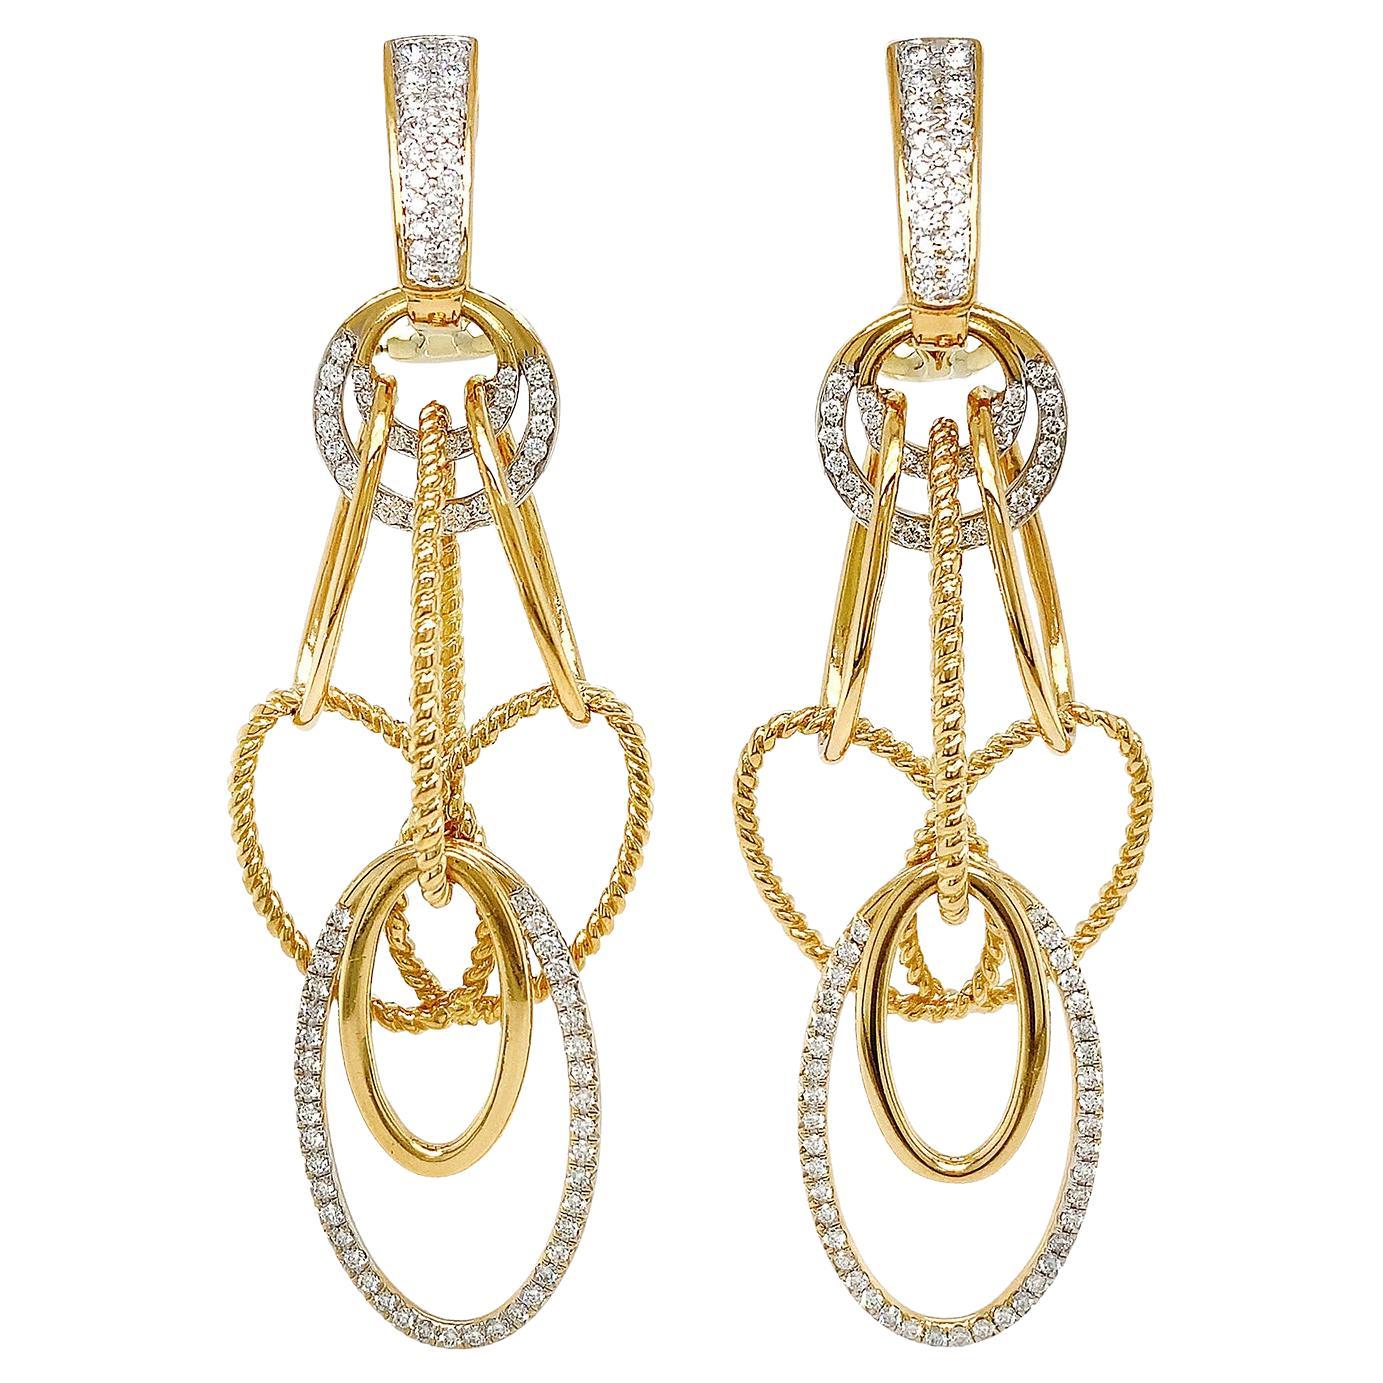 Oval Cascading Chandelier 18K Yellow and White Gold Diamond Earrings